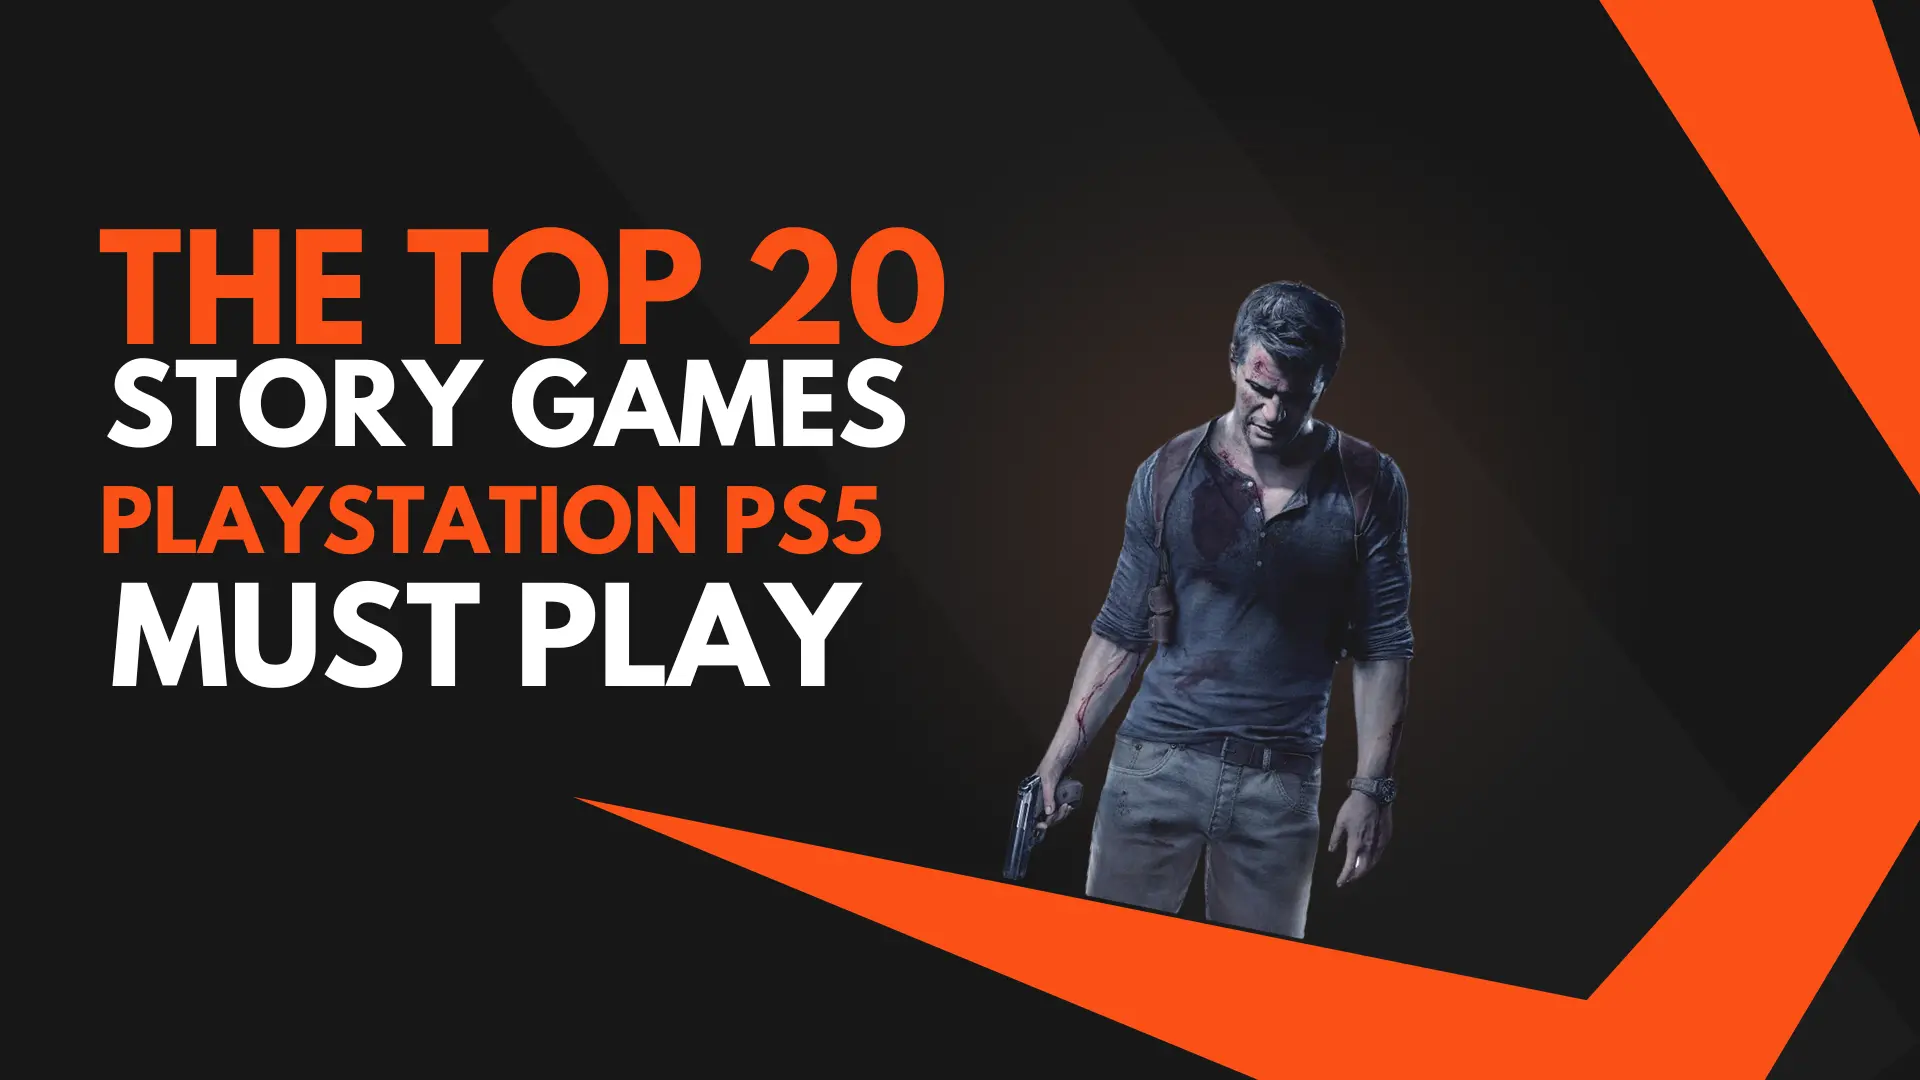 the top 20 story games on playstation must play